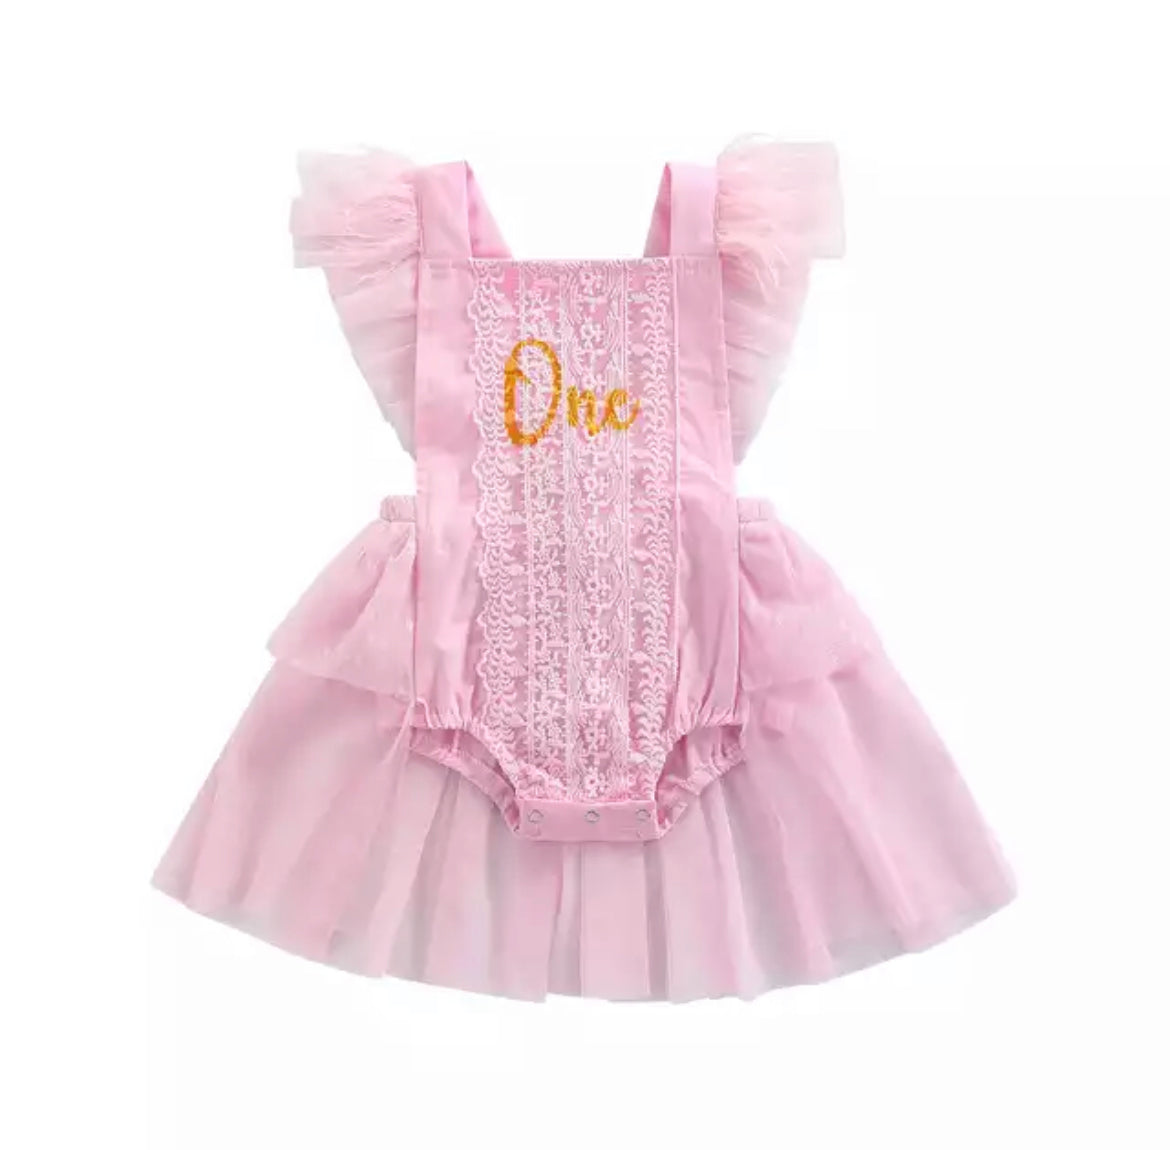 Girls First Birthday Lace “One” Romper - Pink.